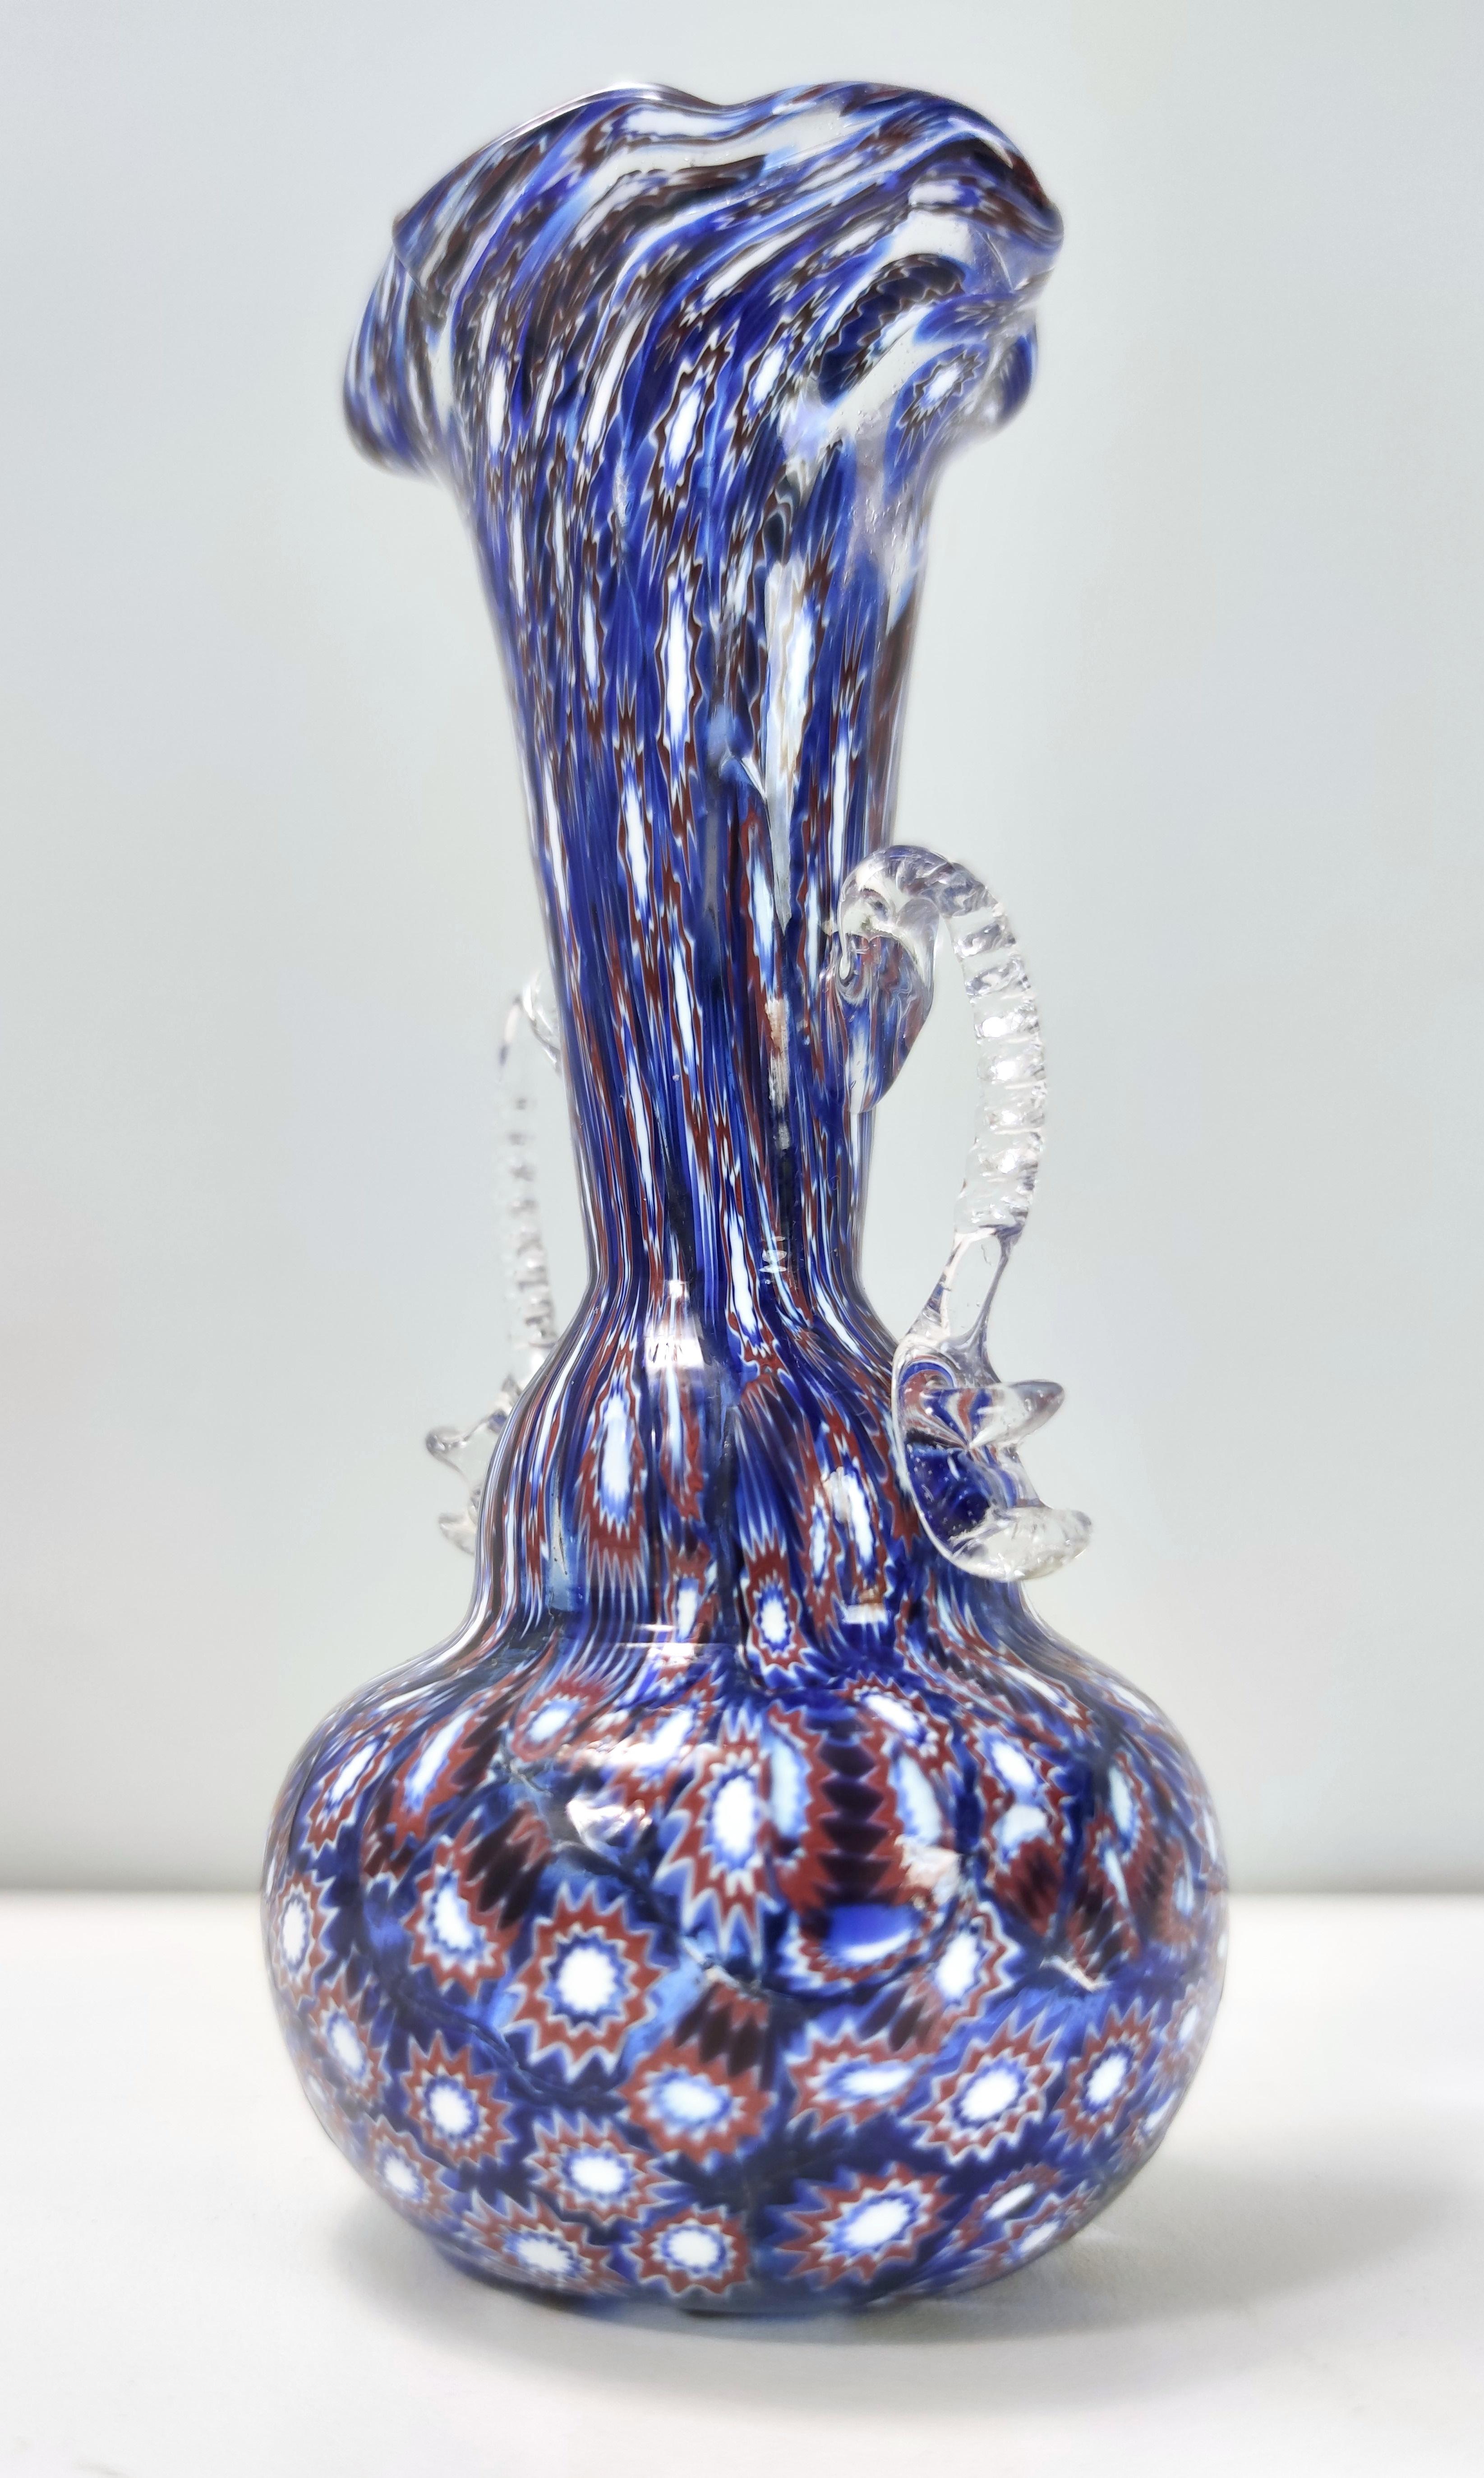 Vintage Blue Murano Glass Vase Ascribable to Fratelli Toso with Murrines, Italy For Sale 1